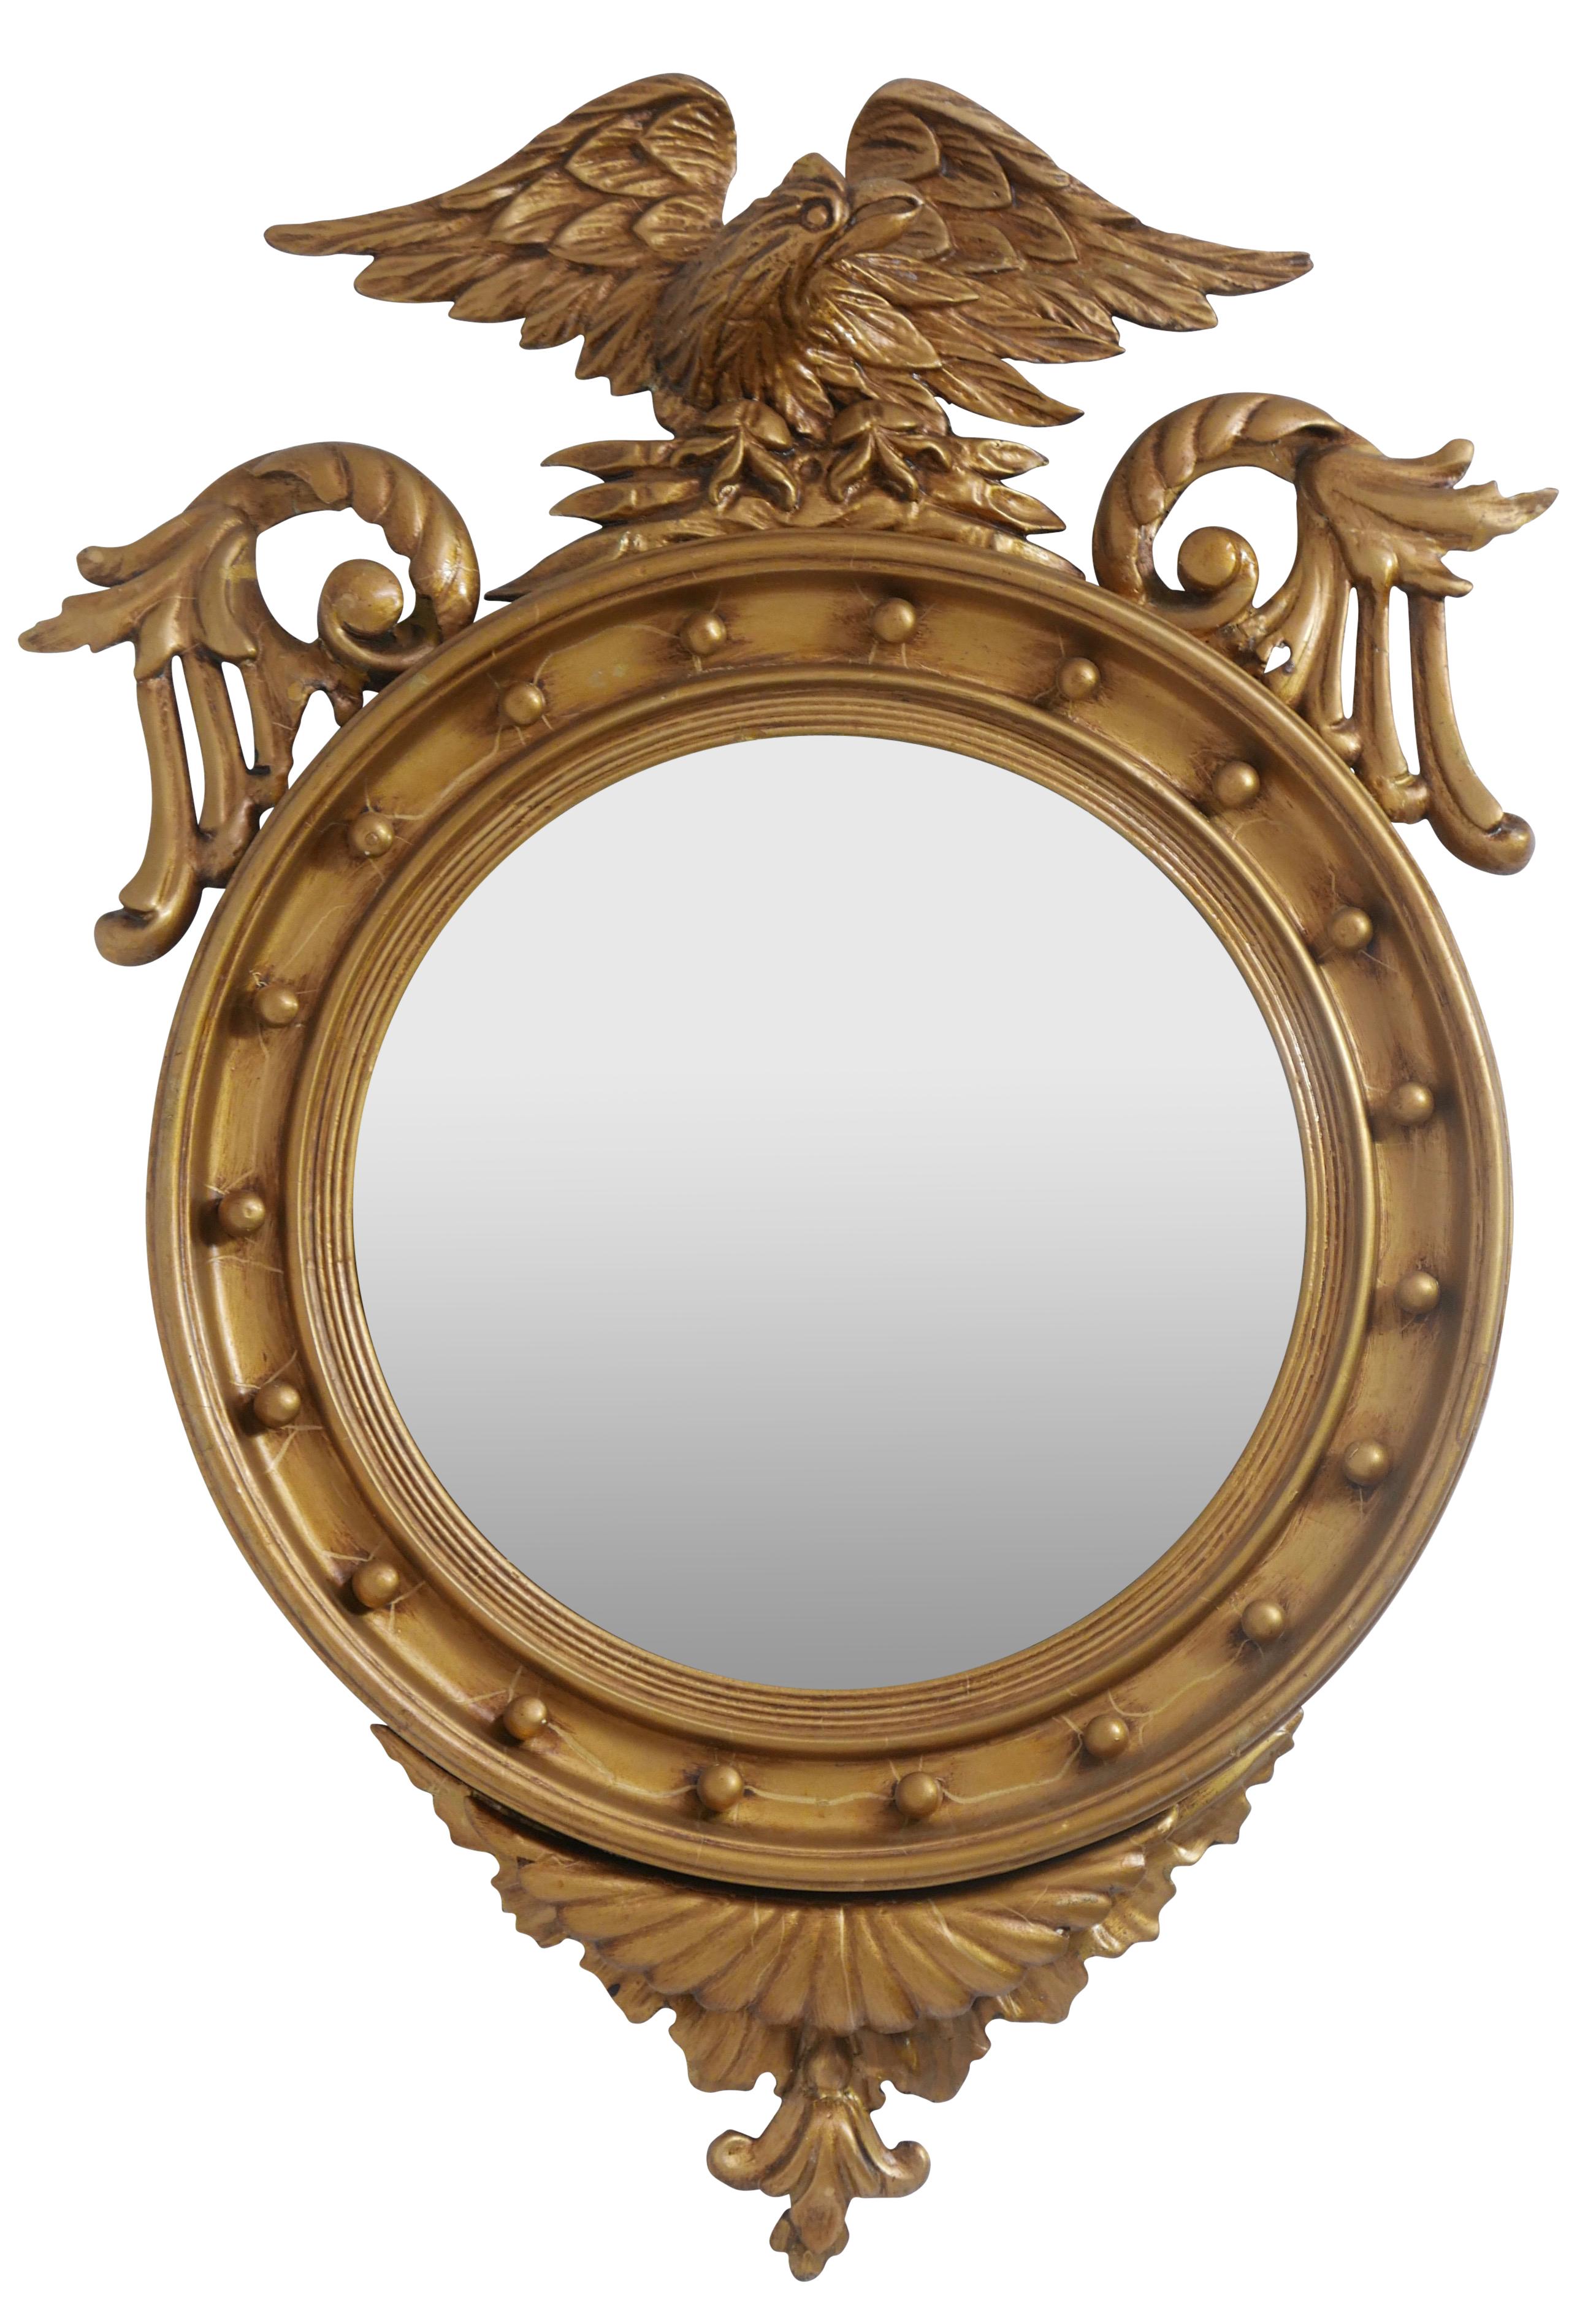 A large gilt Federal style convex mirror surmounted with a spread winged eagle flanked by scrolling leaves, finished on the bottom with what appears to be rippled waves fabric, and having reeded trim around the convex mirror.
American, early 19th